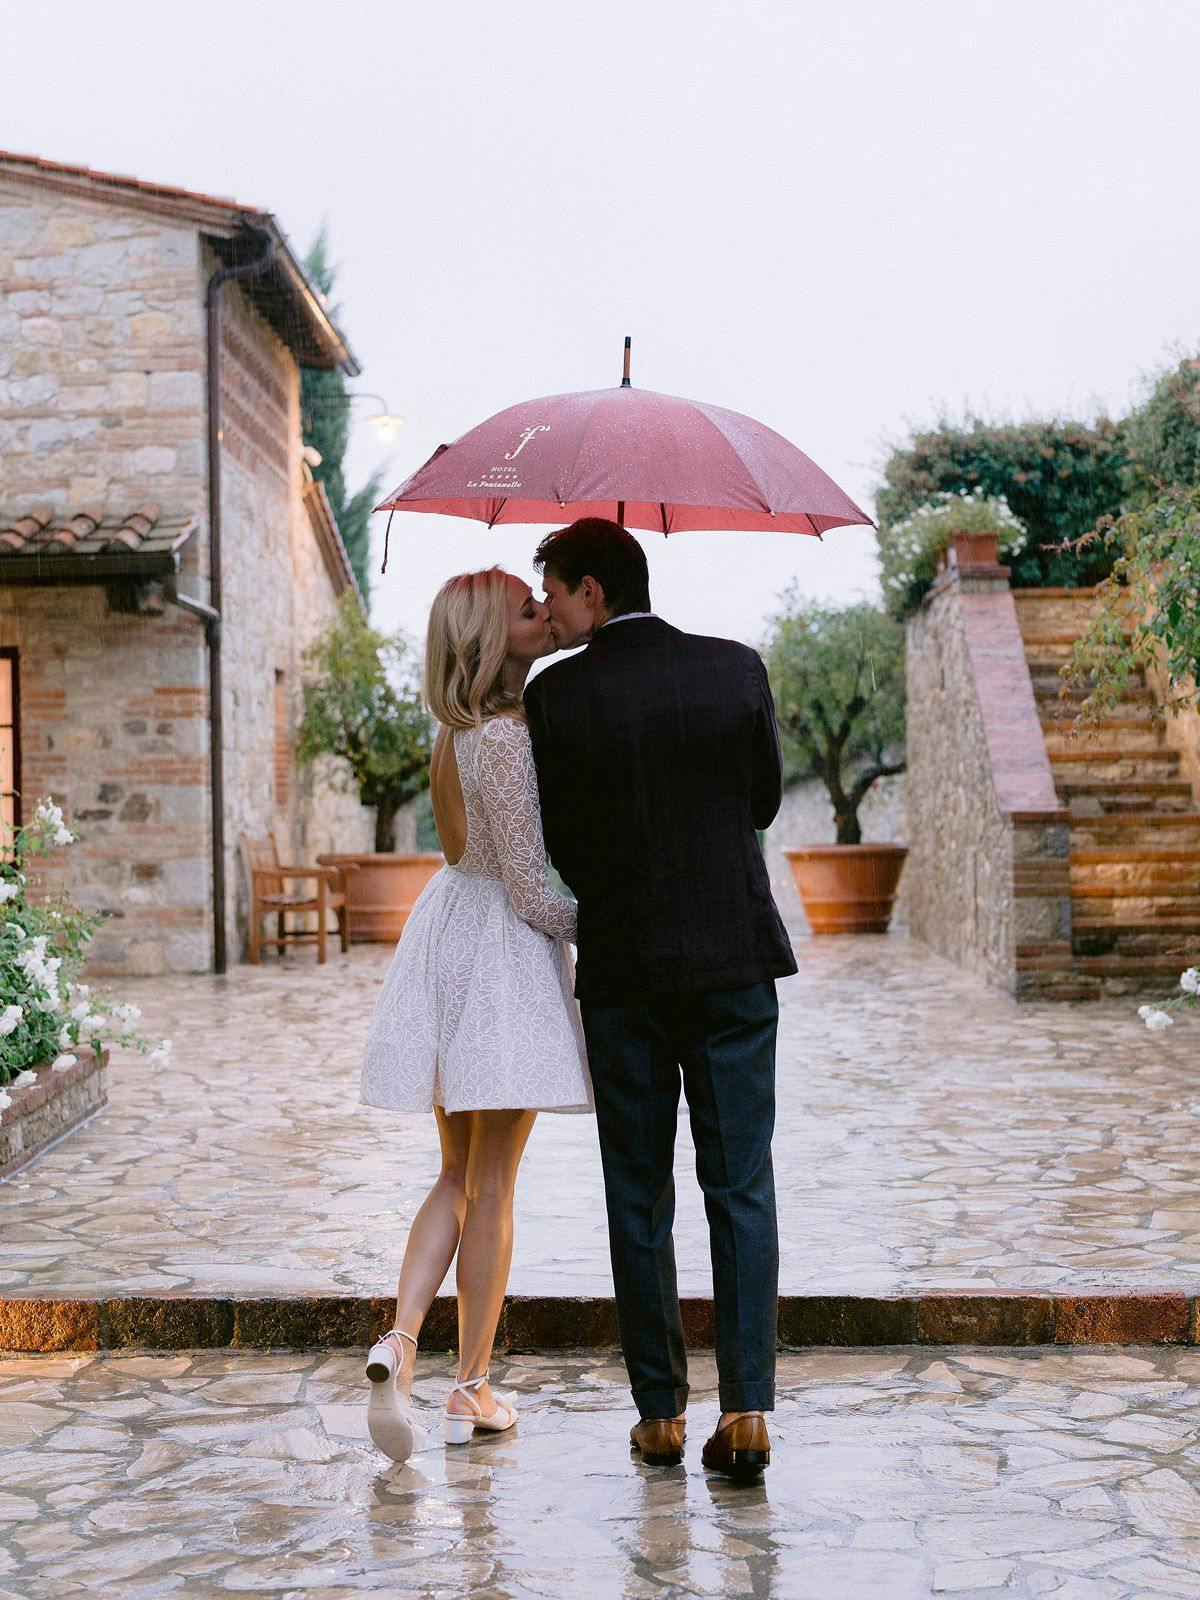 ideas for your romantic anniversary in tuscany